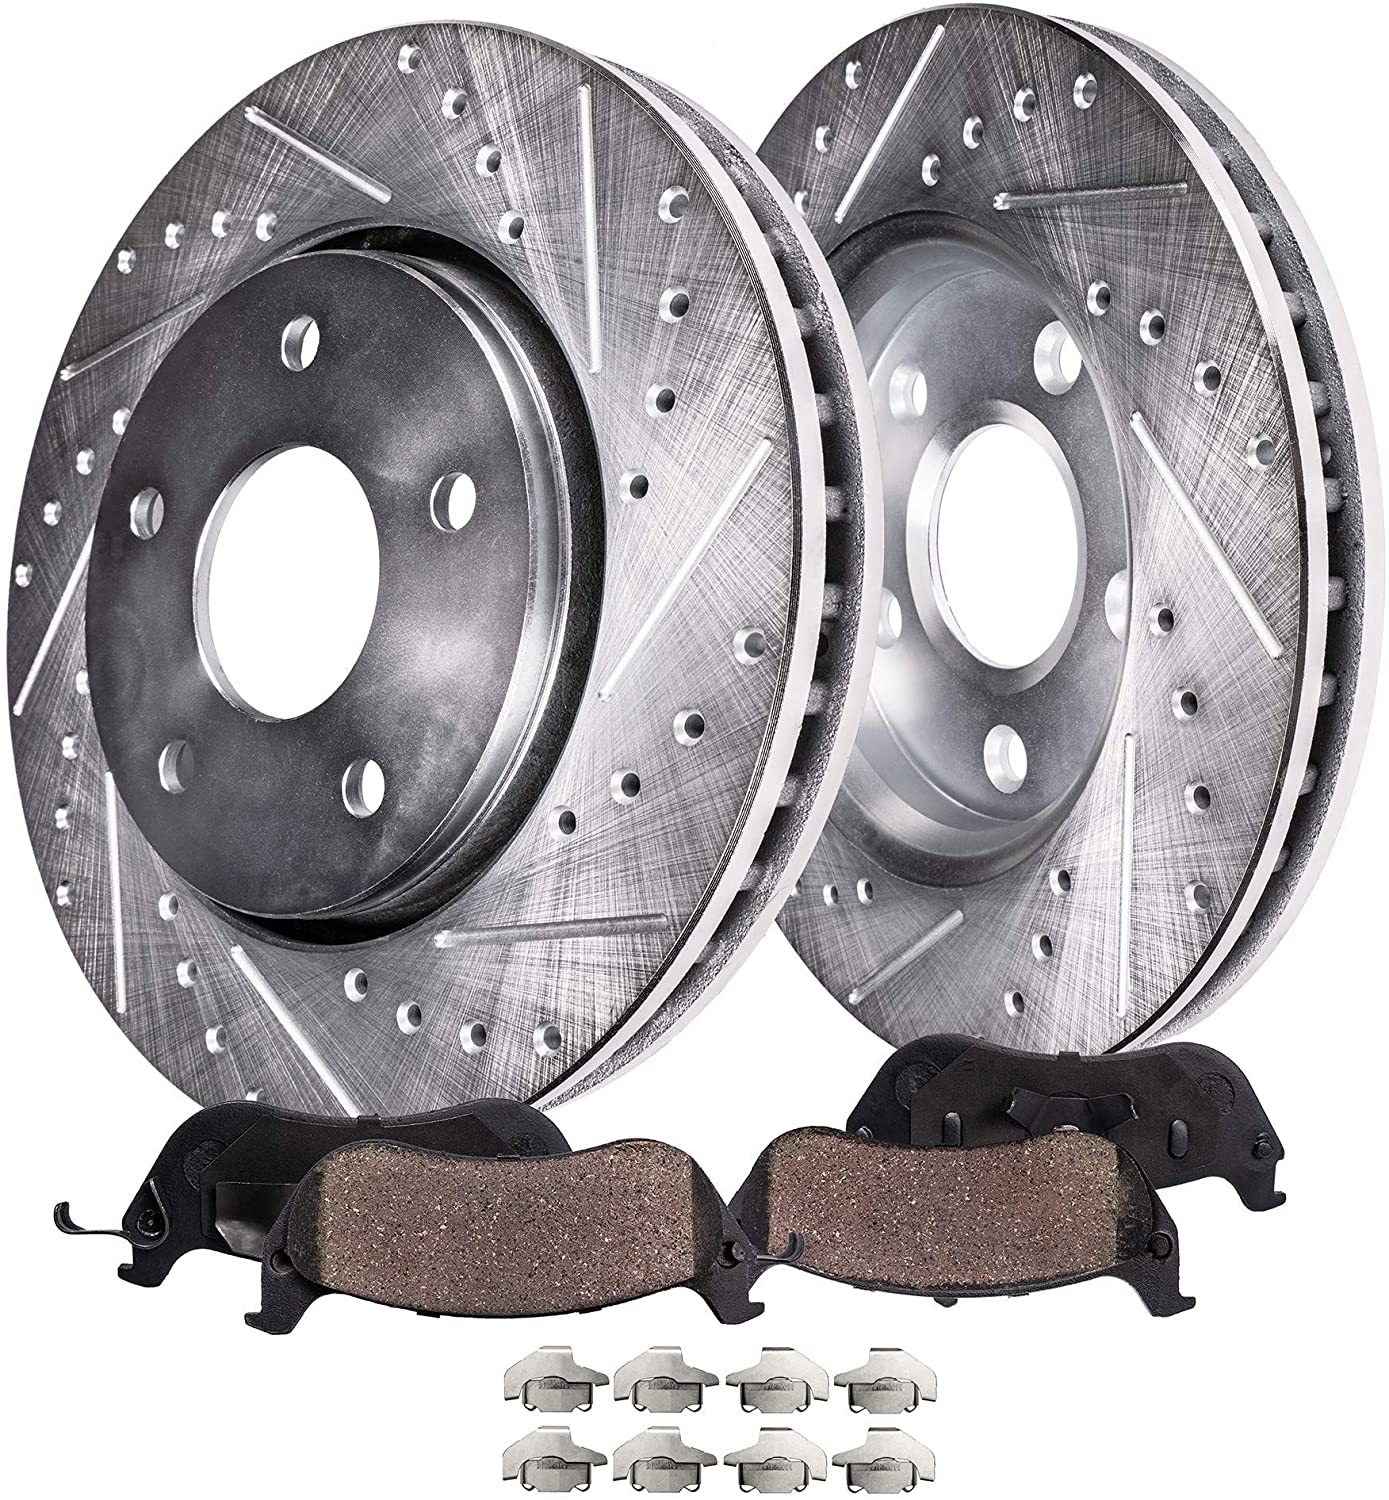 Detroit Axle - Pair (2) Front Drilled and Slotted Disc Brake Kit Rotors w/Ceramic Pads for 2009-2010 Pontiac Vibe 1.8L - [2008-2014 Scion xD] - 2009-2019 Toyota Corolla - [2009-2014 Matrix 1.8L]